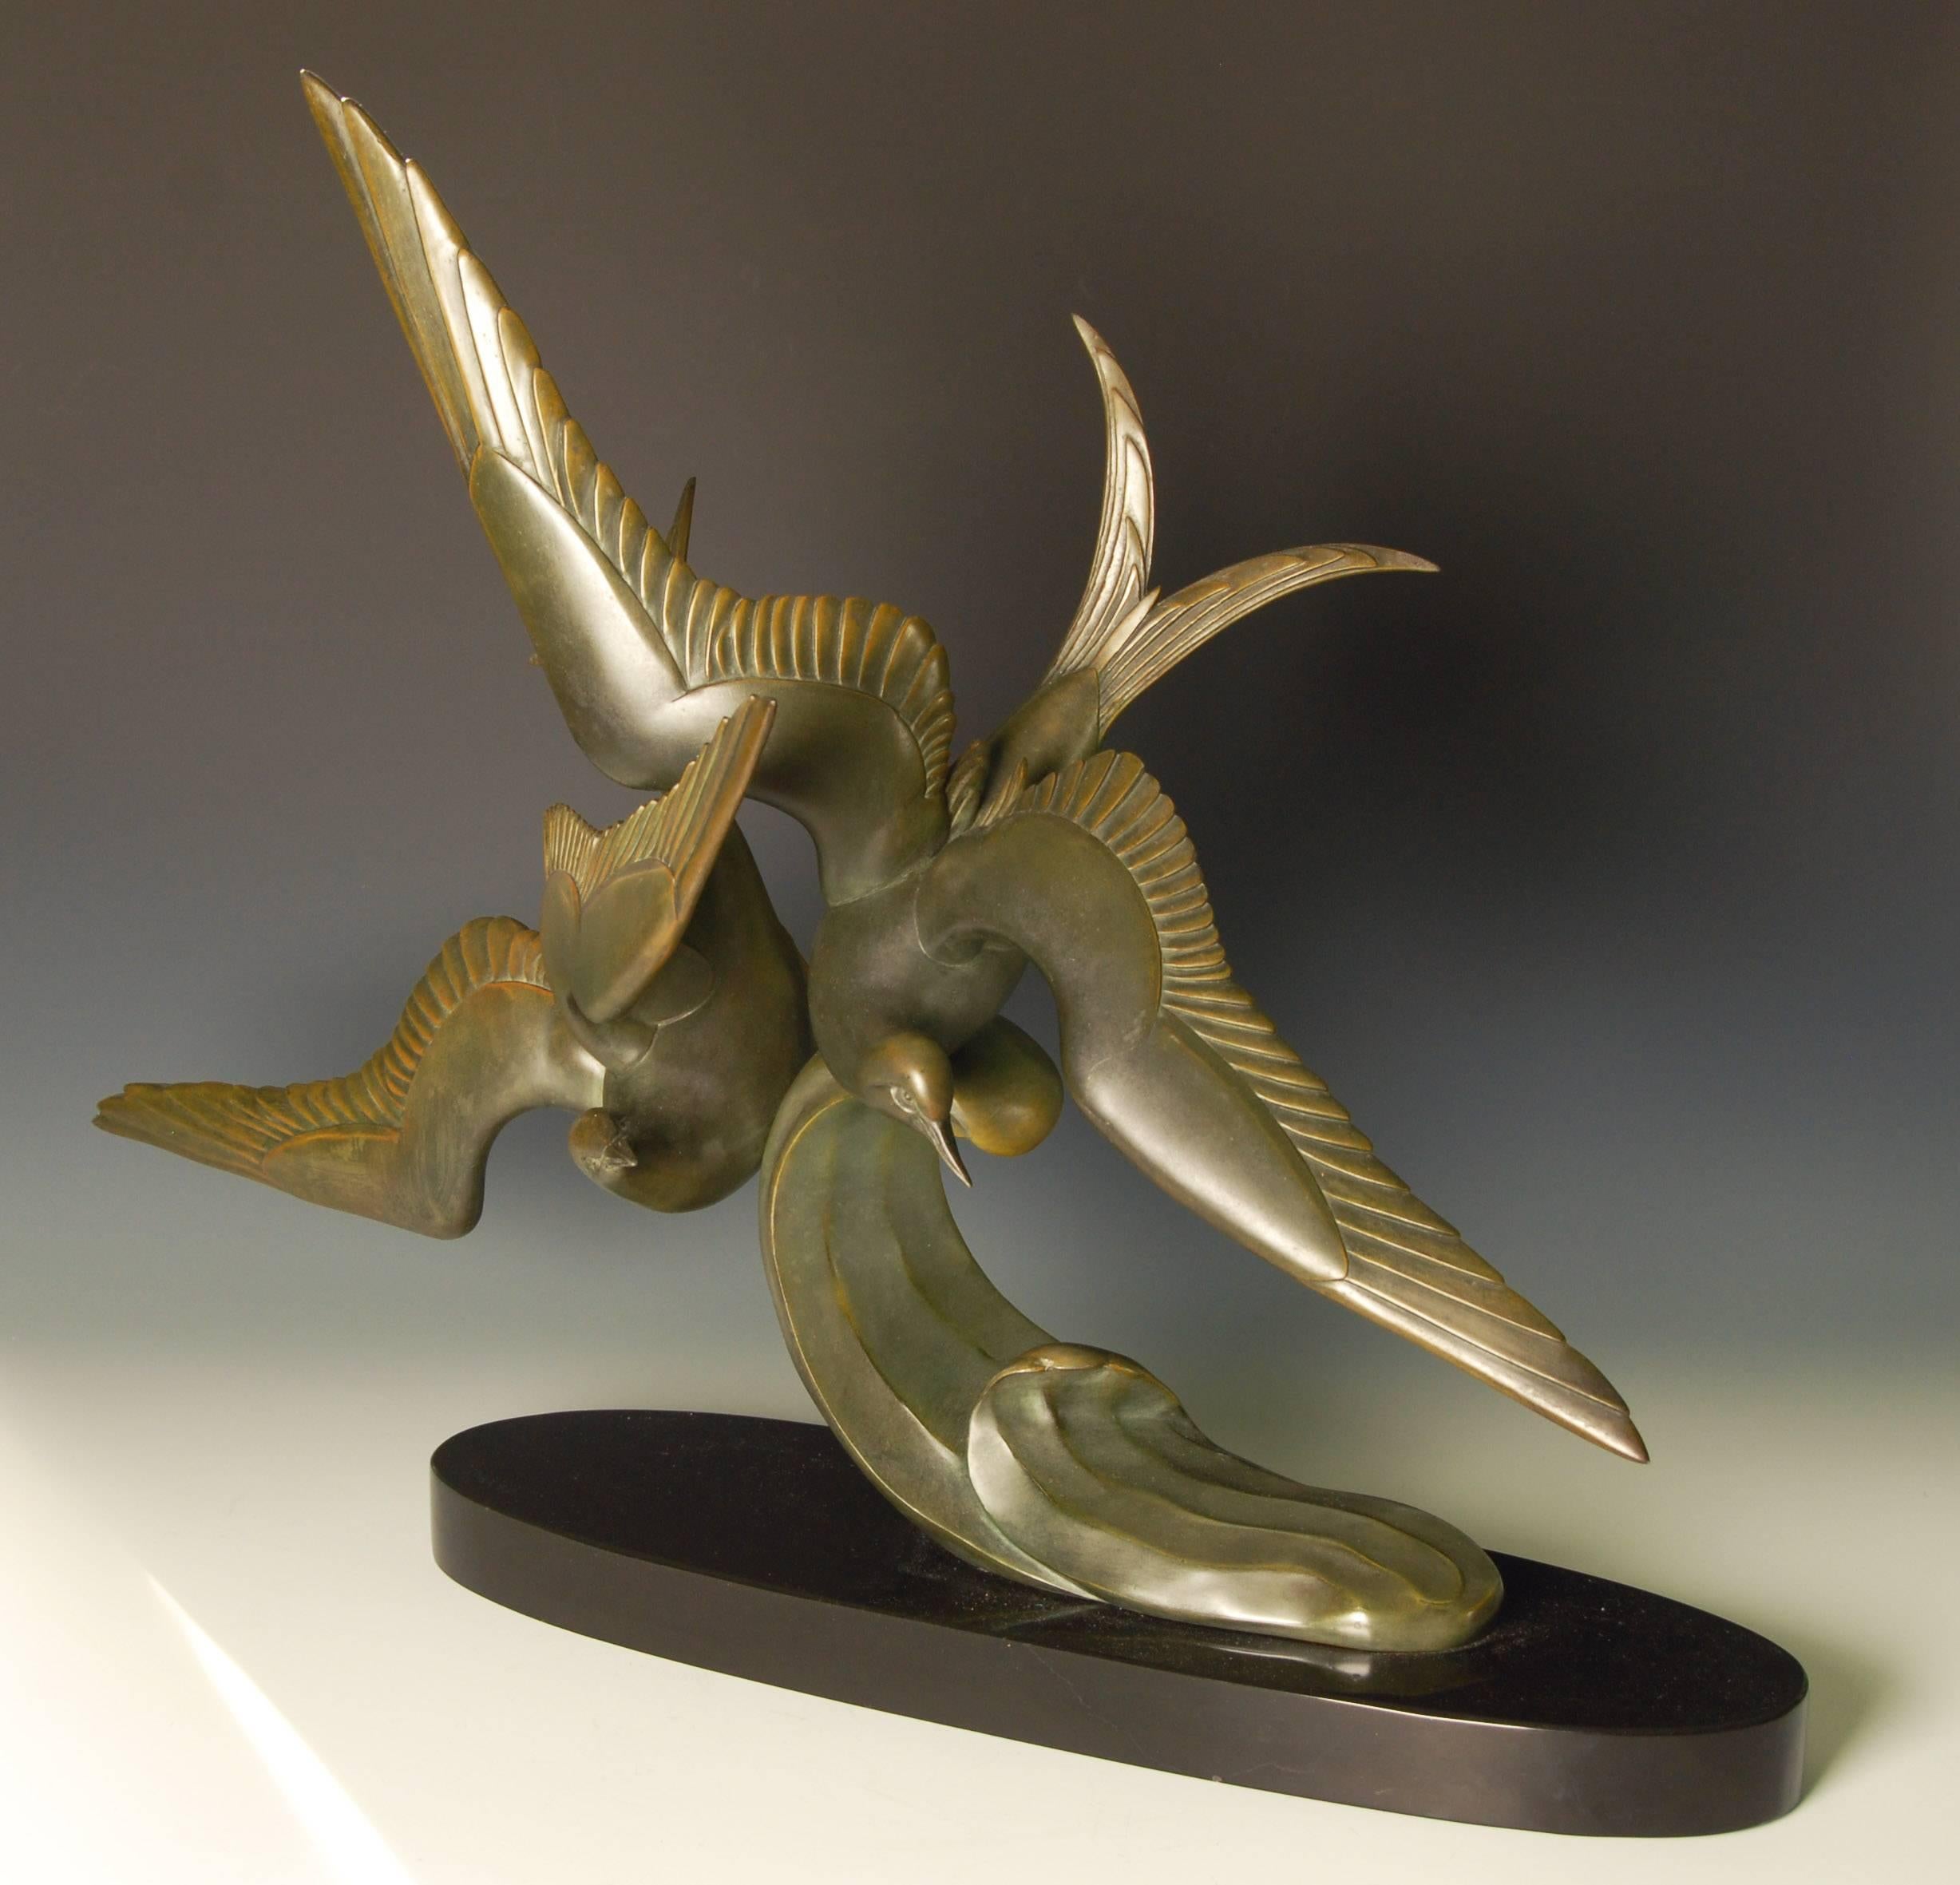 Art Deco bronze sculpture of terns in flight over a wave, by Irenee Rochard (1906-1984) on a polished black marble base.
This is a bronze piece (not spelter) and is extremely heavy and substantial weighing around 50 ibs or 23 kg.